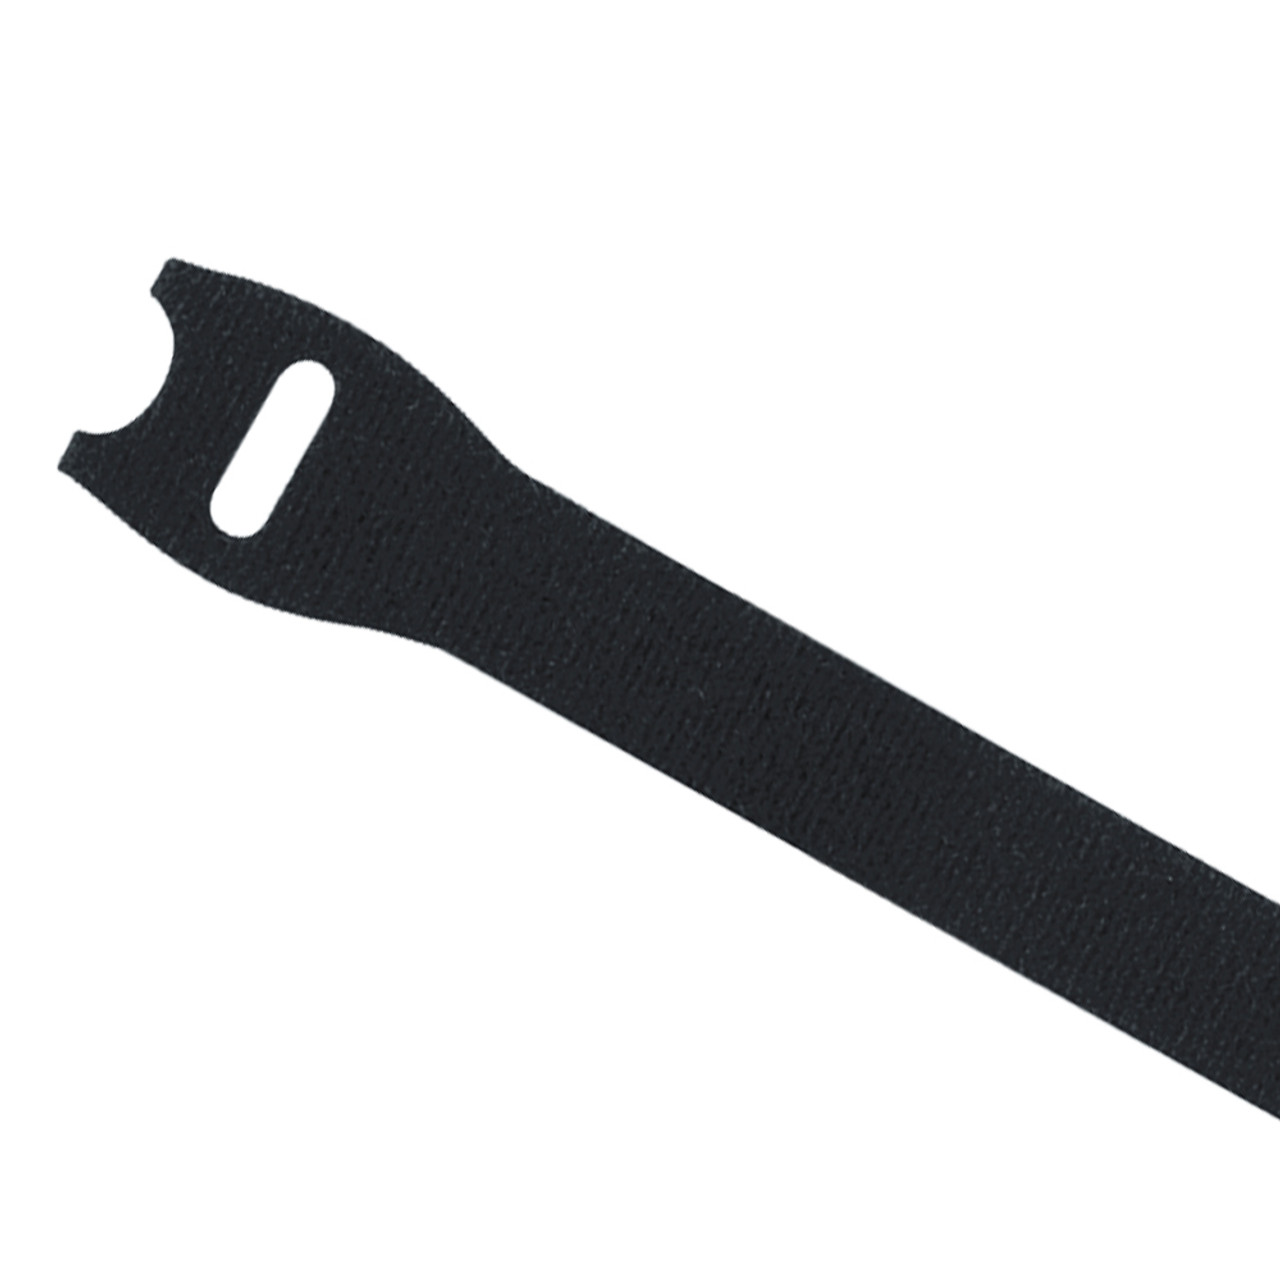 VELCRO® Brand ONE-WRAP® Cable Tie Strap in Black in 100 PCS-8 IN